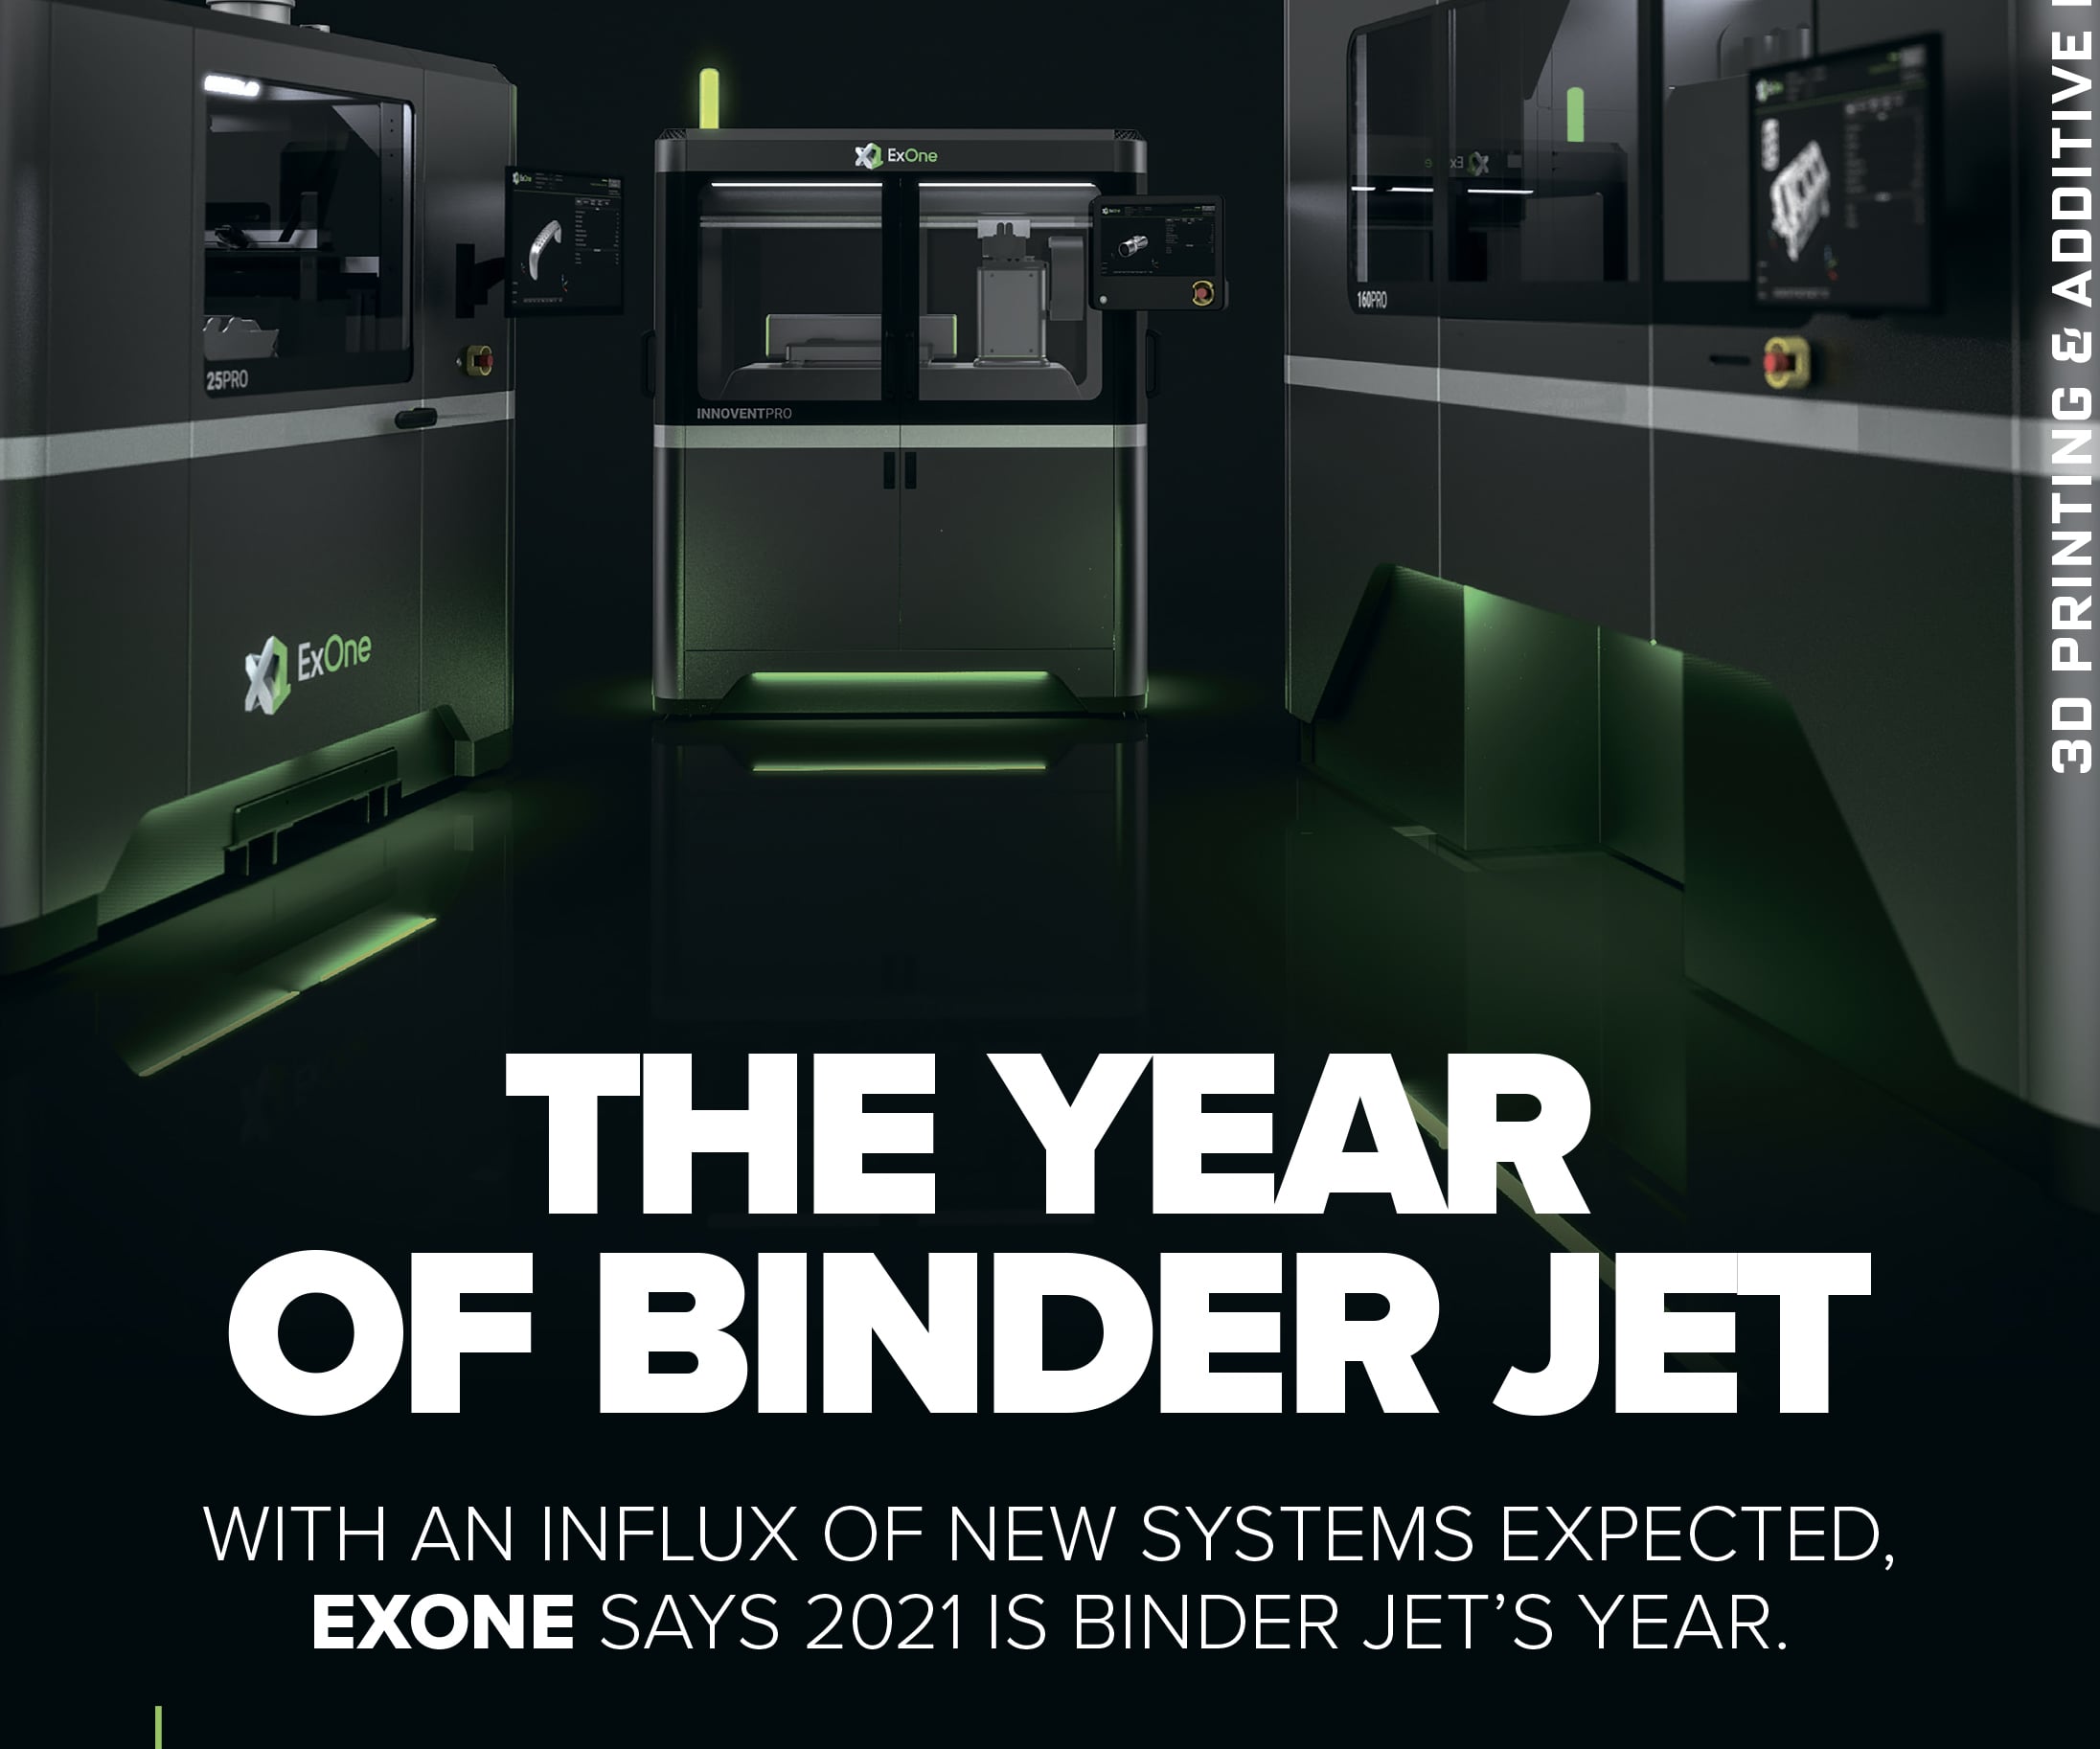 The Year of Binder Jet